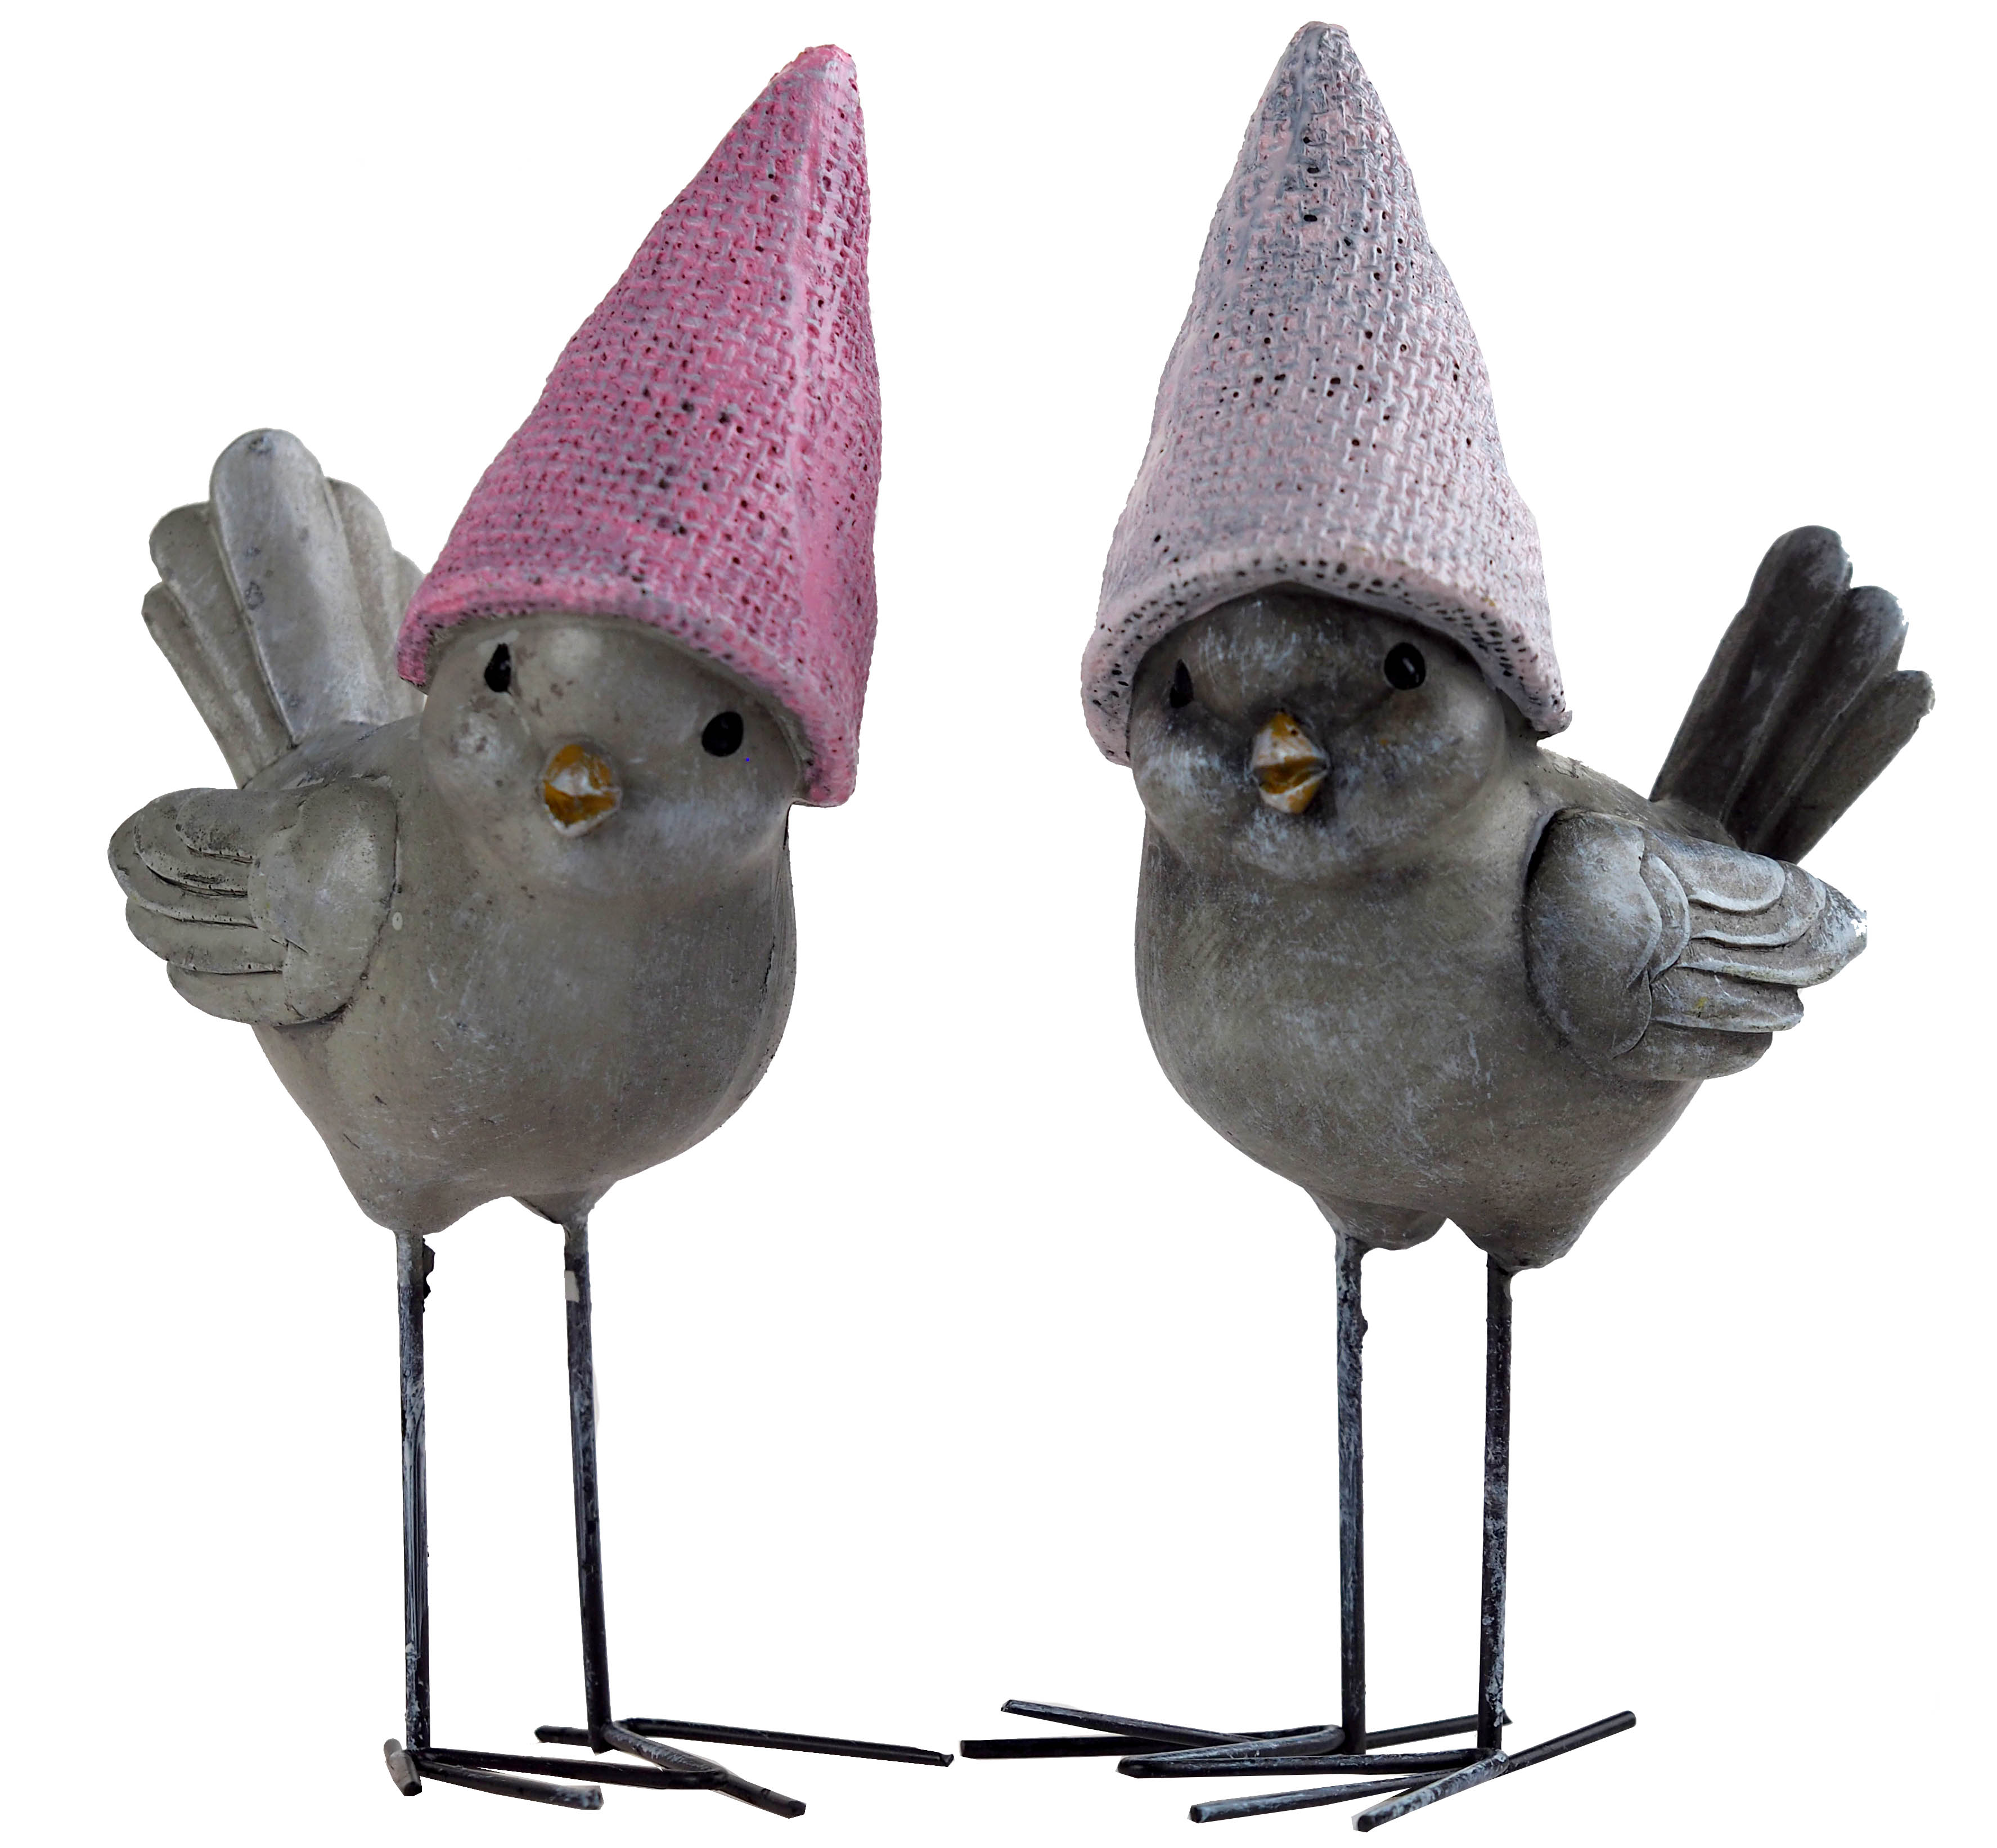 Cute Bird Ornaments With Pink Hats - Set of 2